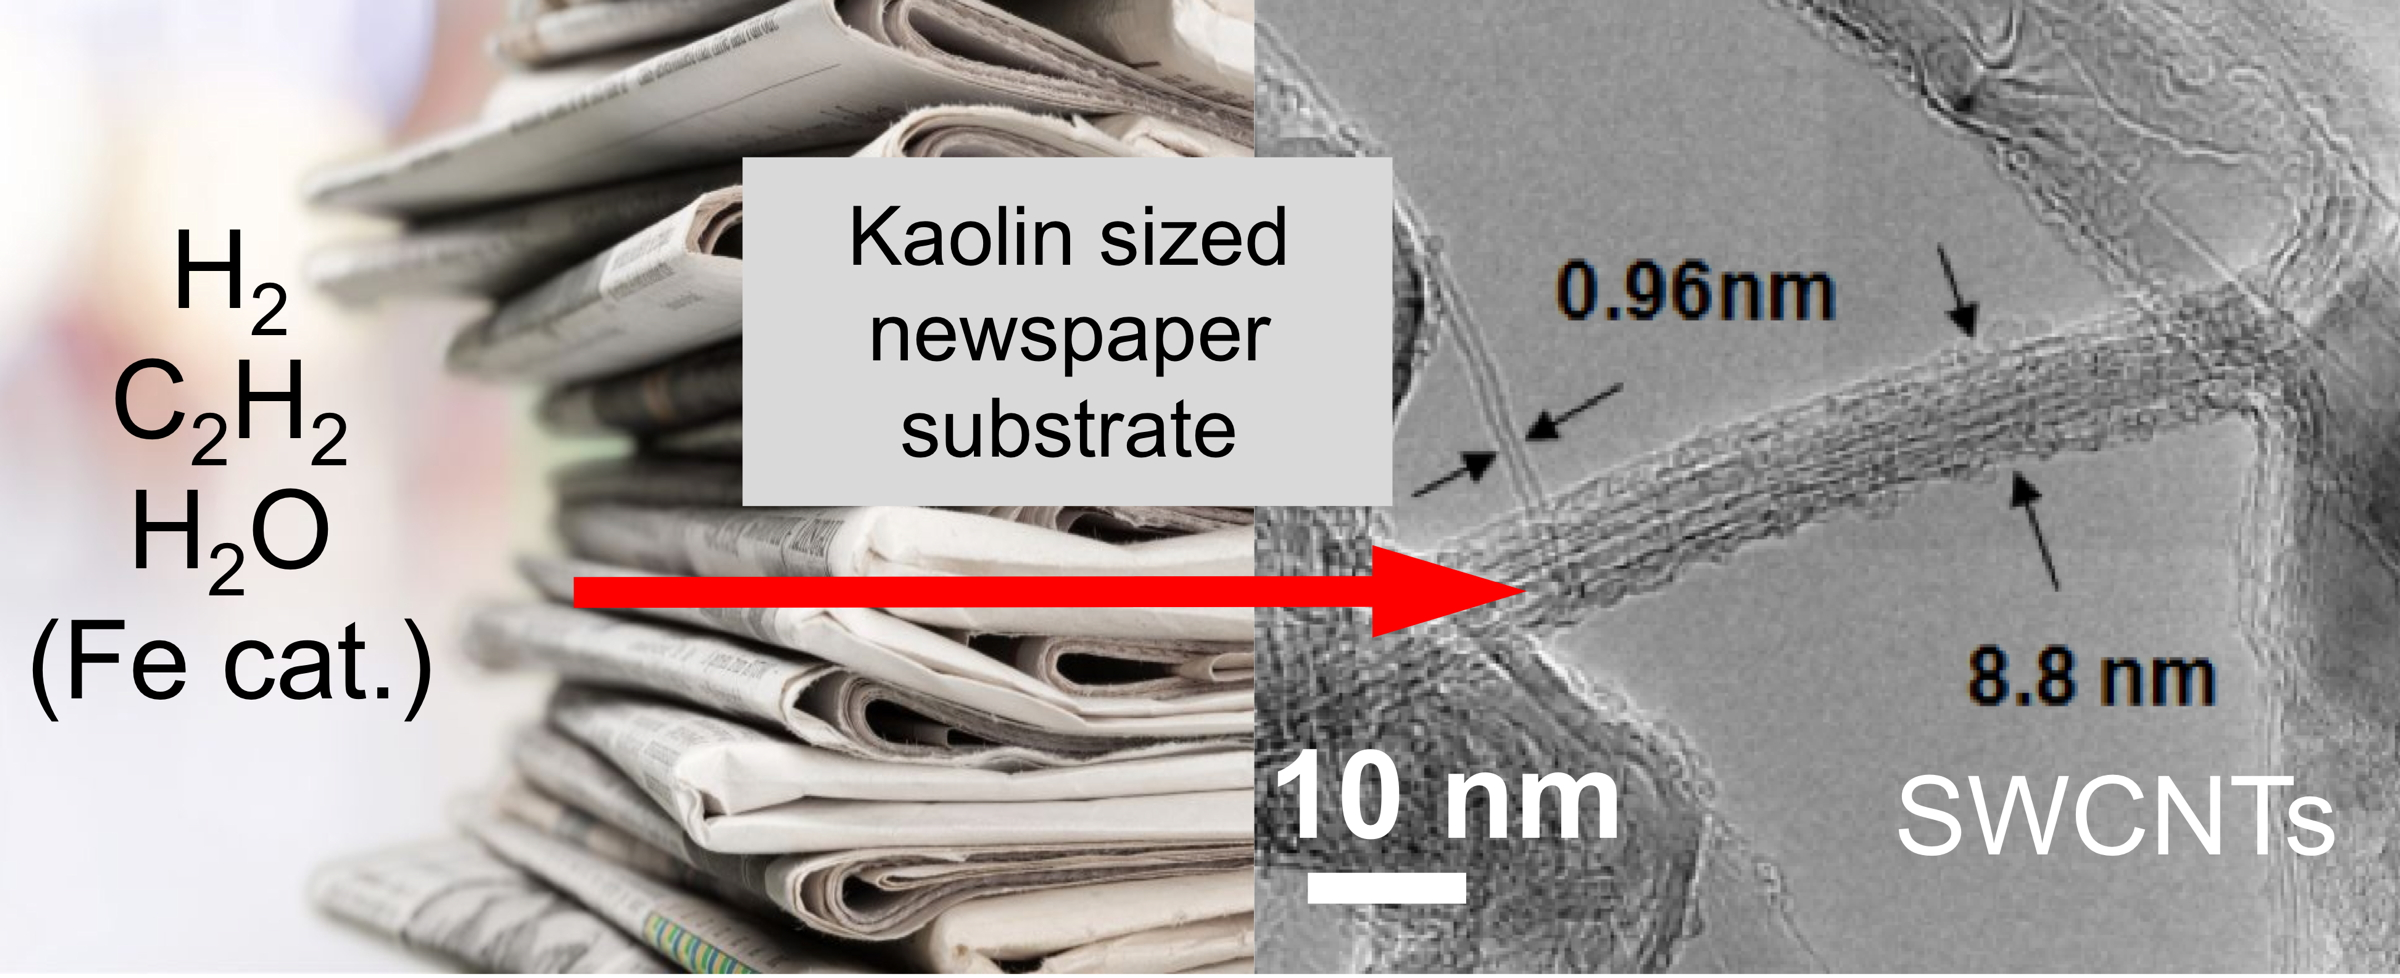 C | Free Full-Text | From Newspaper Substrate to Nanotubes—Analysis of  Carbonized Soot Grown on Kaolin Sized Newsprint